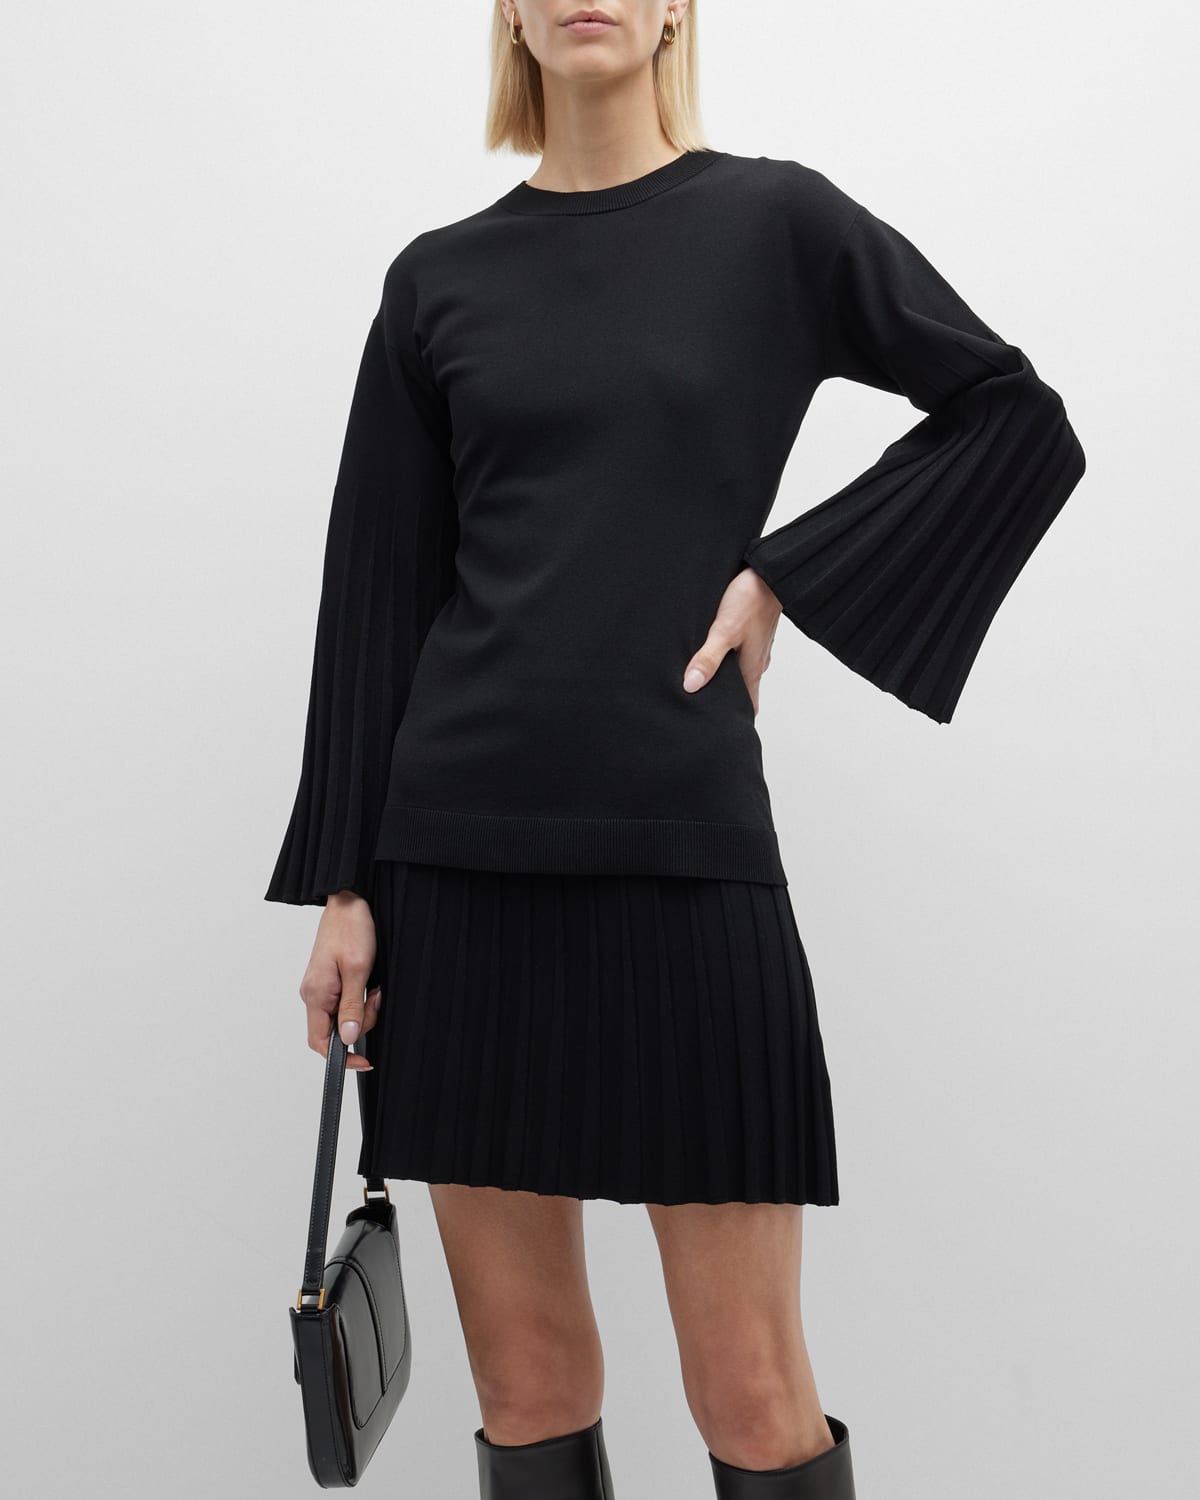 The Charity Pleated Sweater